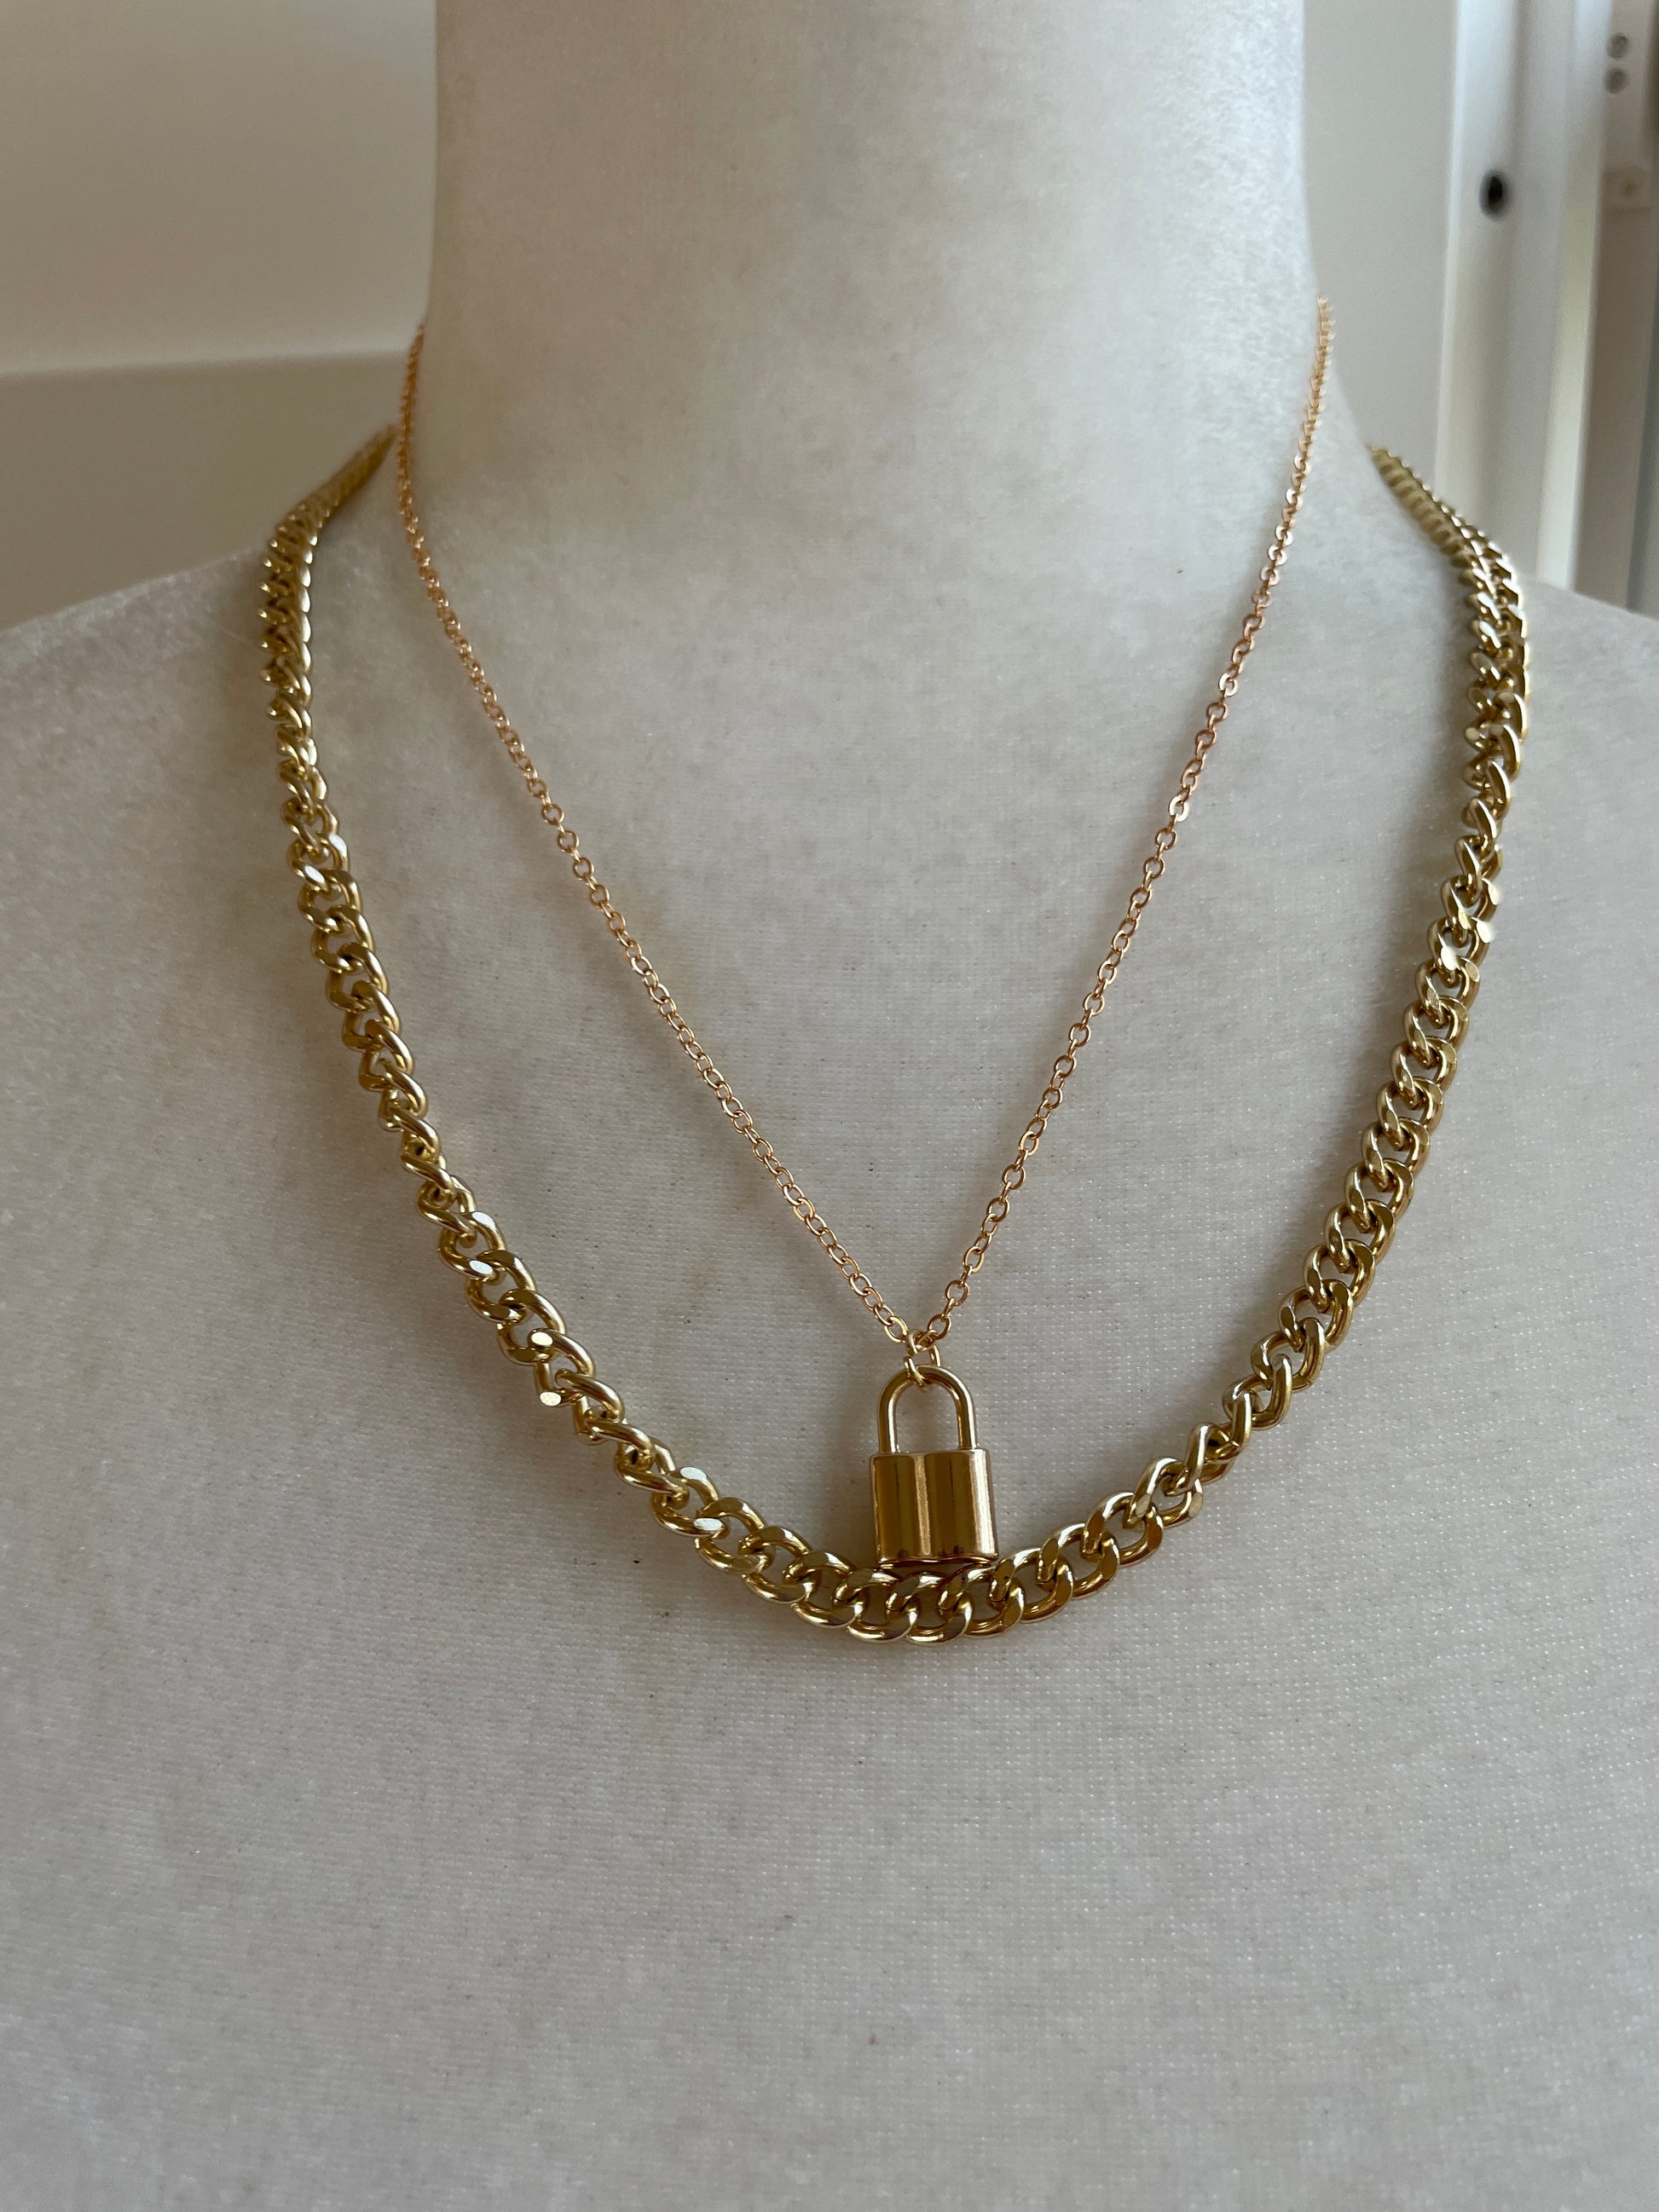  2000s Gold Tone Chains Lock Pendant 2 Layering Necklaces